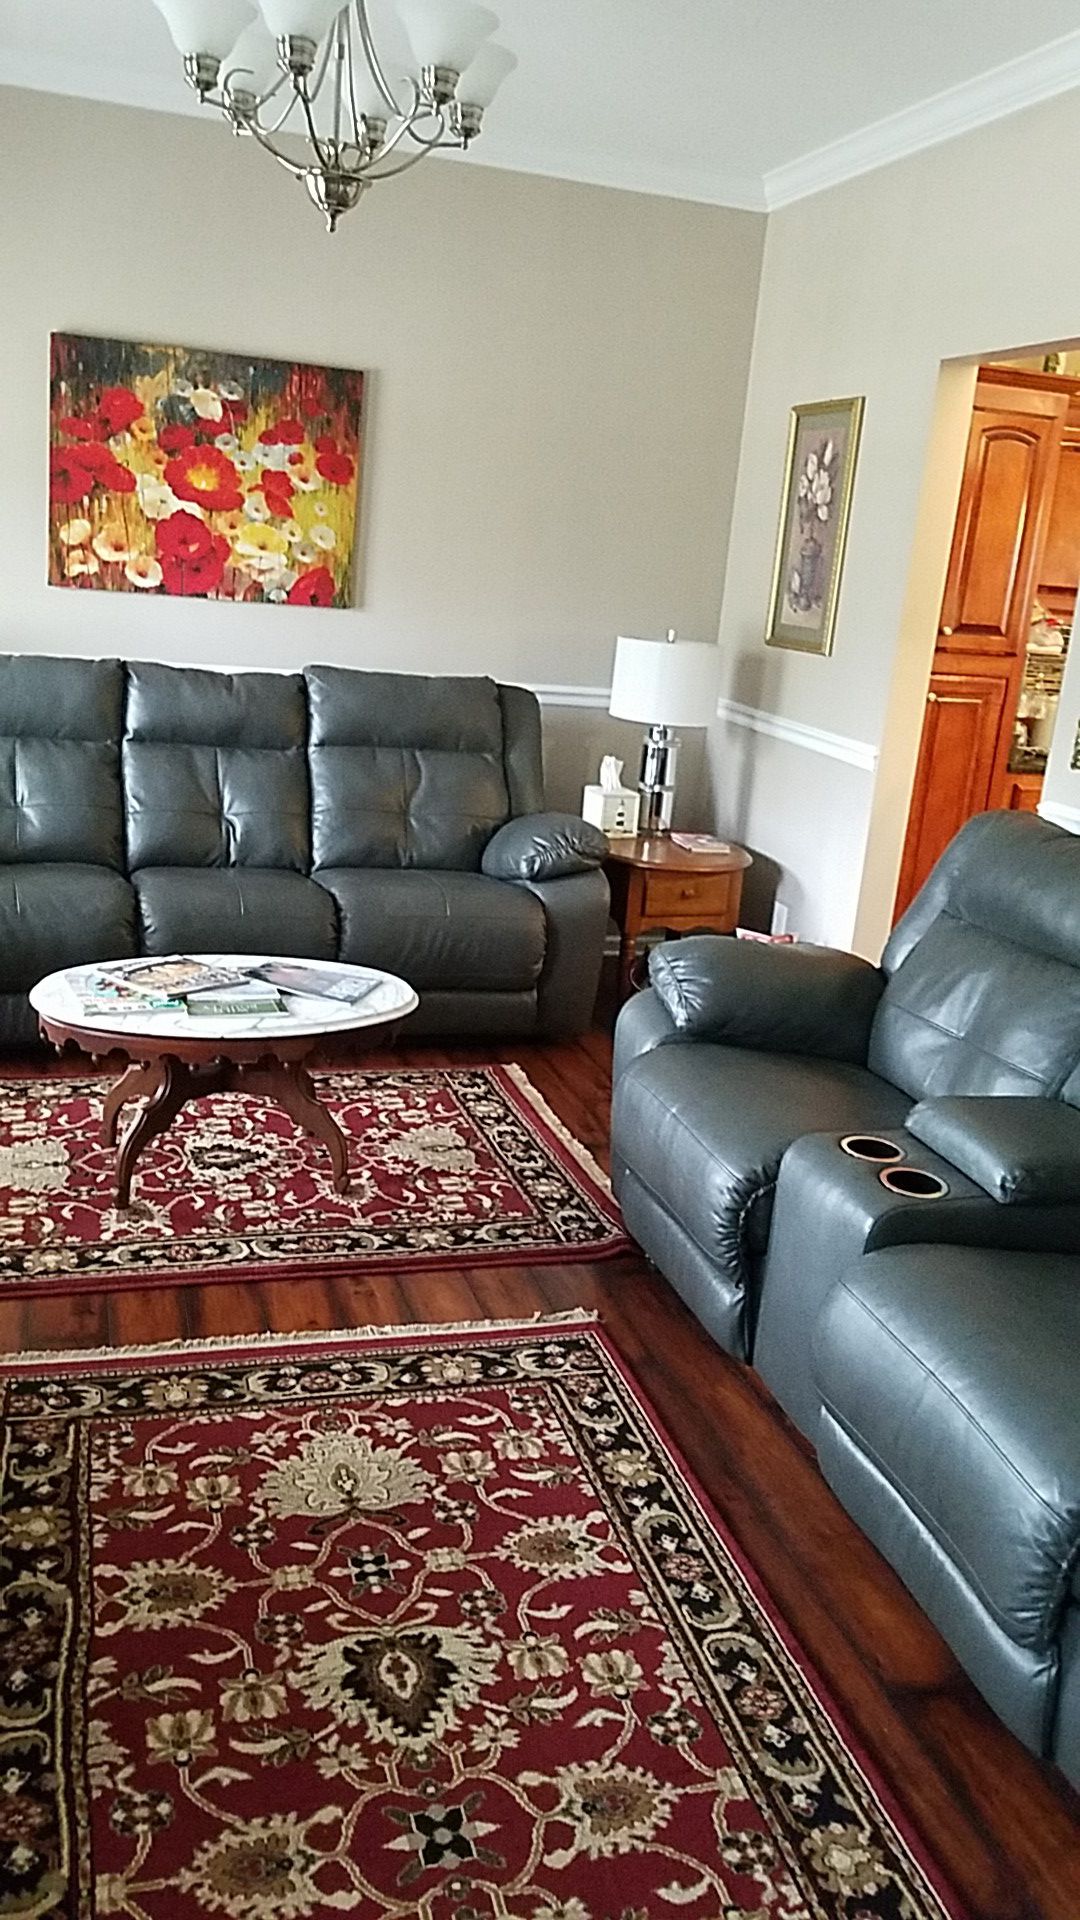 Sofa and loveseat 4 wall hugger recliners